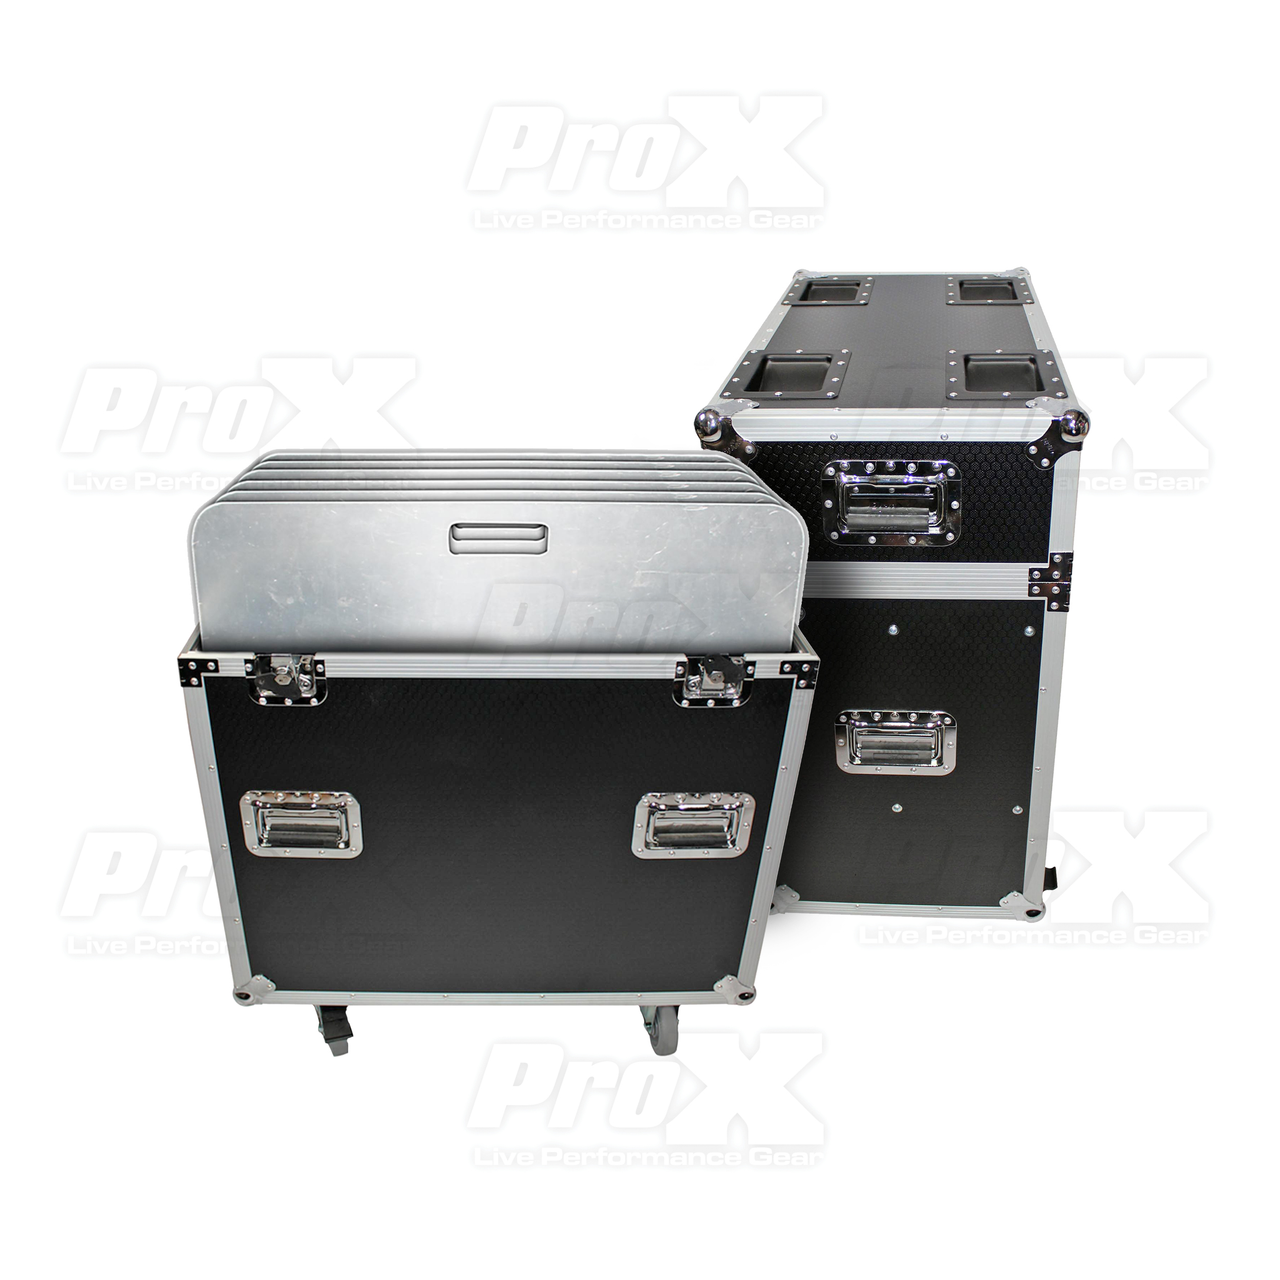 ProX ATA 300-Style Flight Case with Casters for 25 Microphone Stands